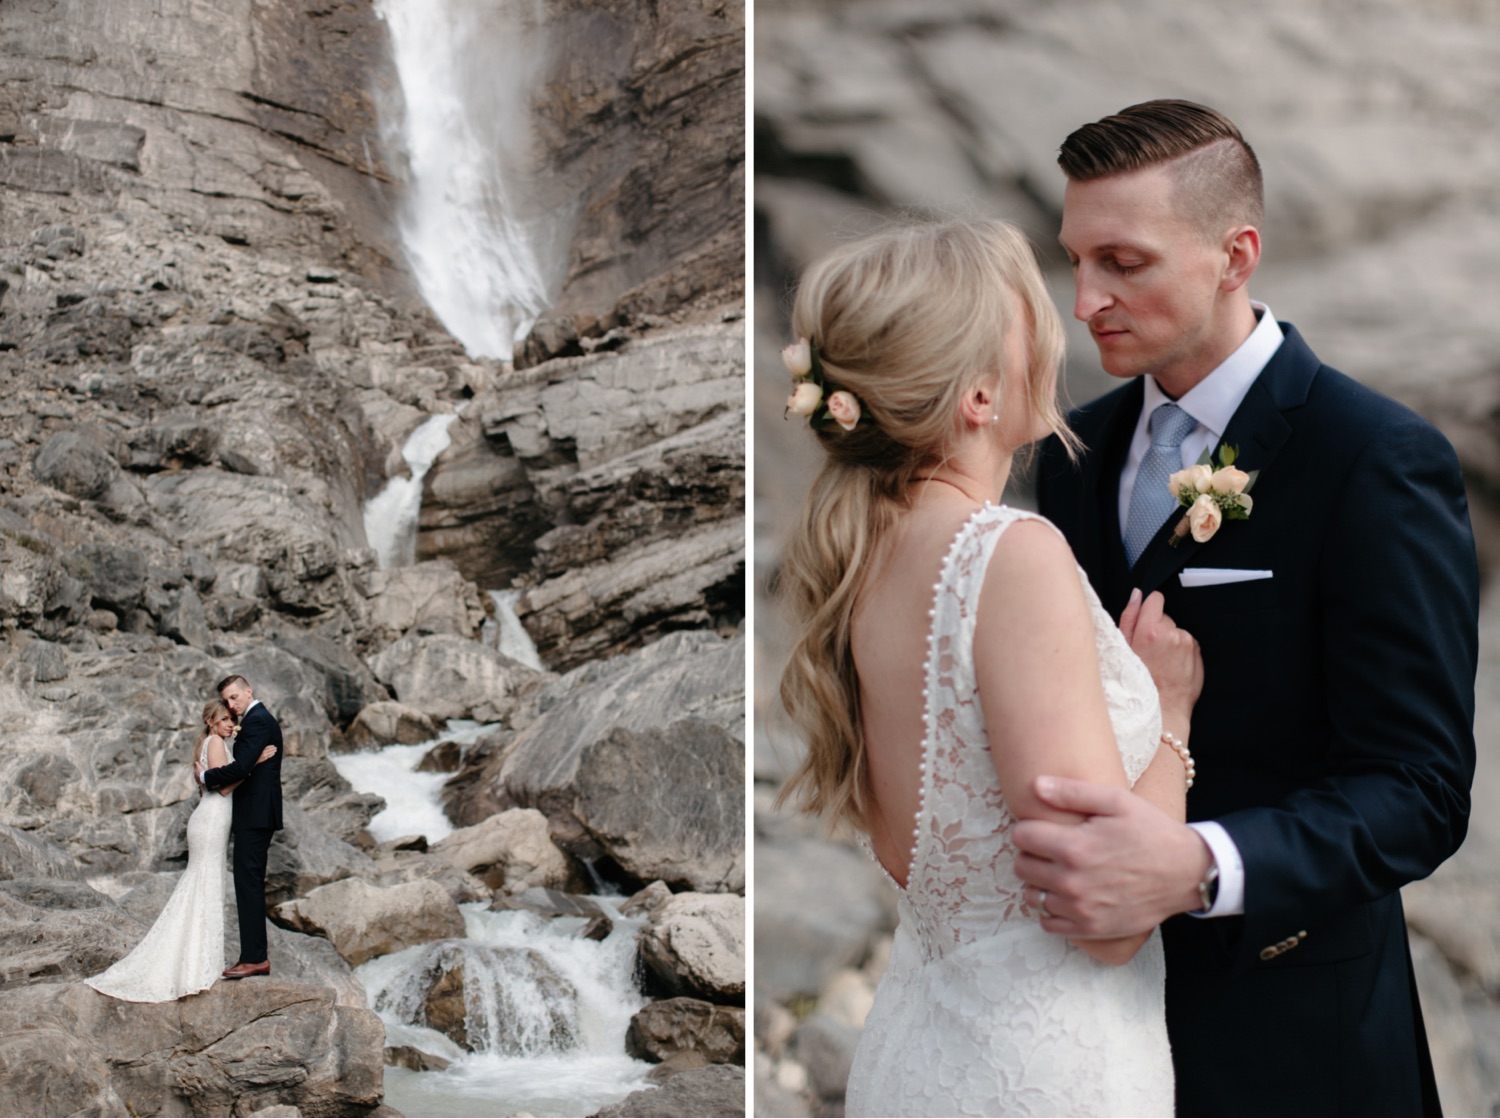 Newly eloped couple snuggling beside a cascading waterfall on a rocky slope in British Columbia